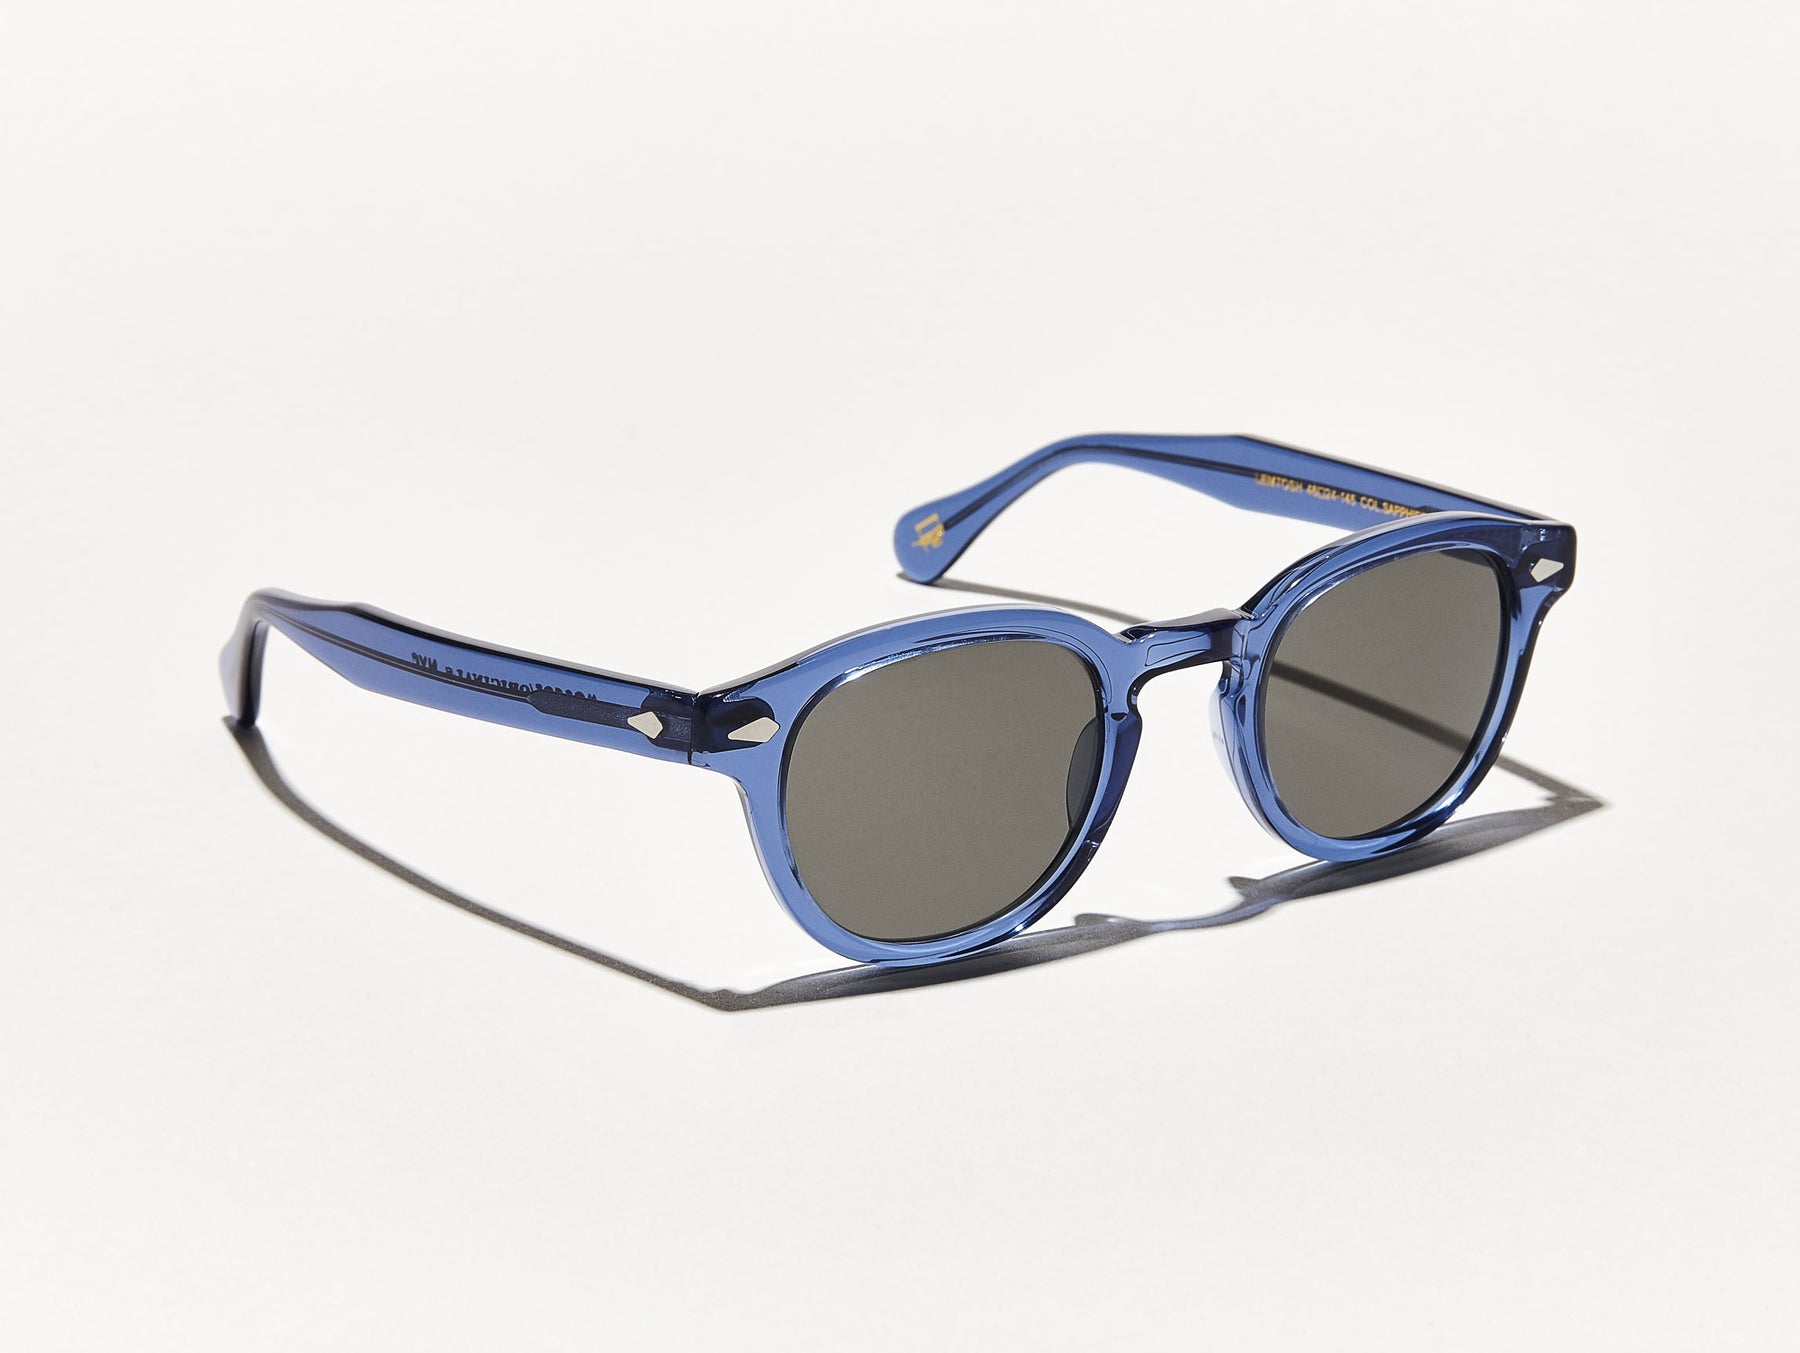 The LEMTOSH SUN in Sapphire with Grey Glass Lenses